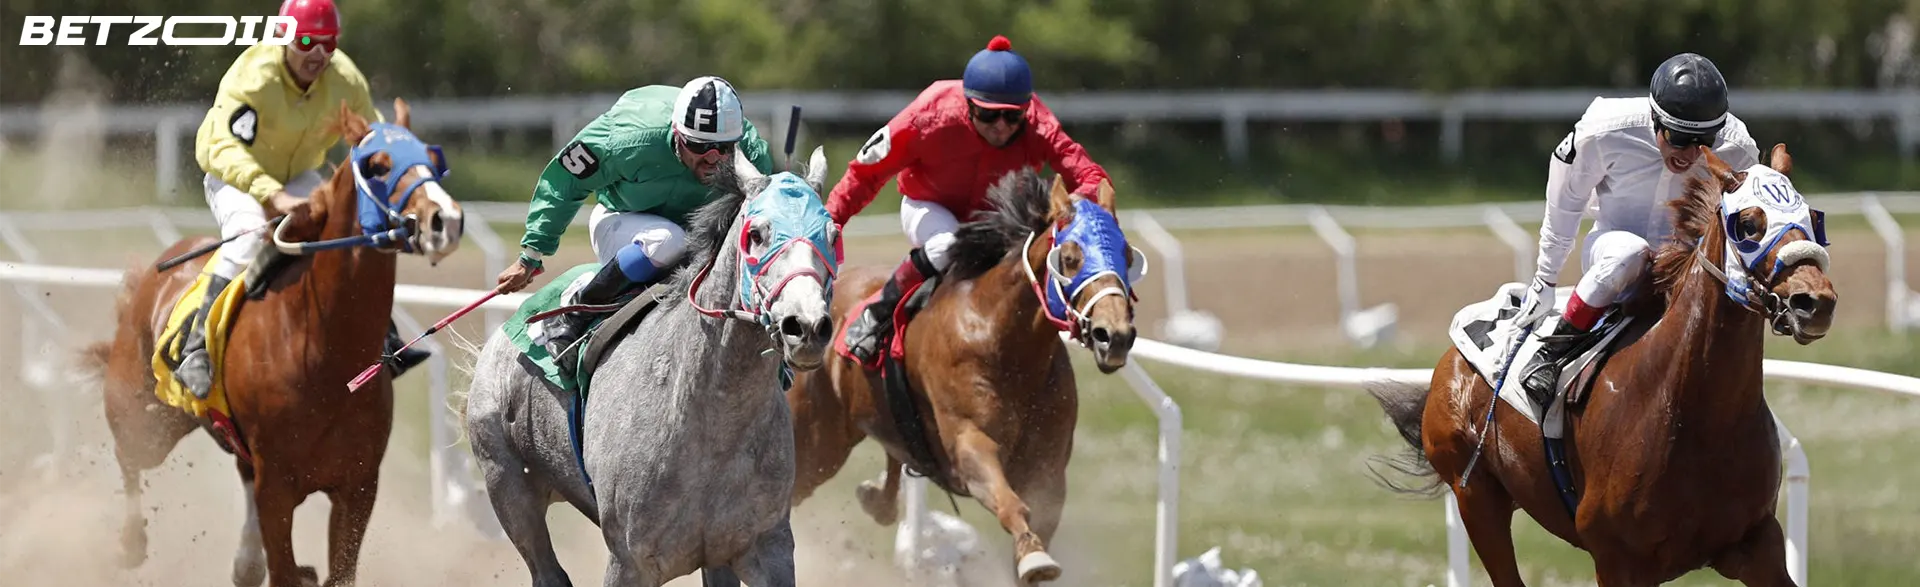 Jockeys riding horses in a competitive race, highlighting horse racing betting sites in Canada.